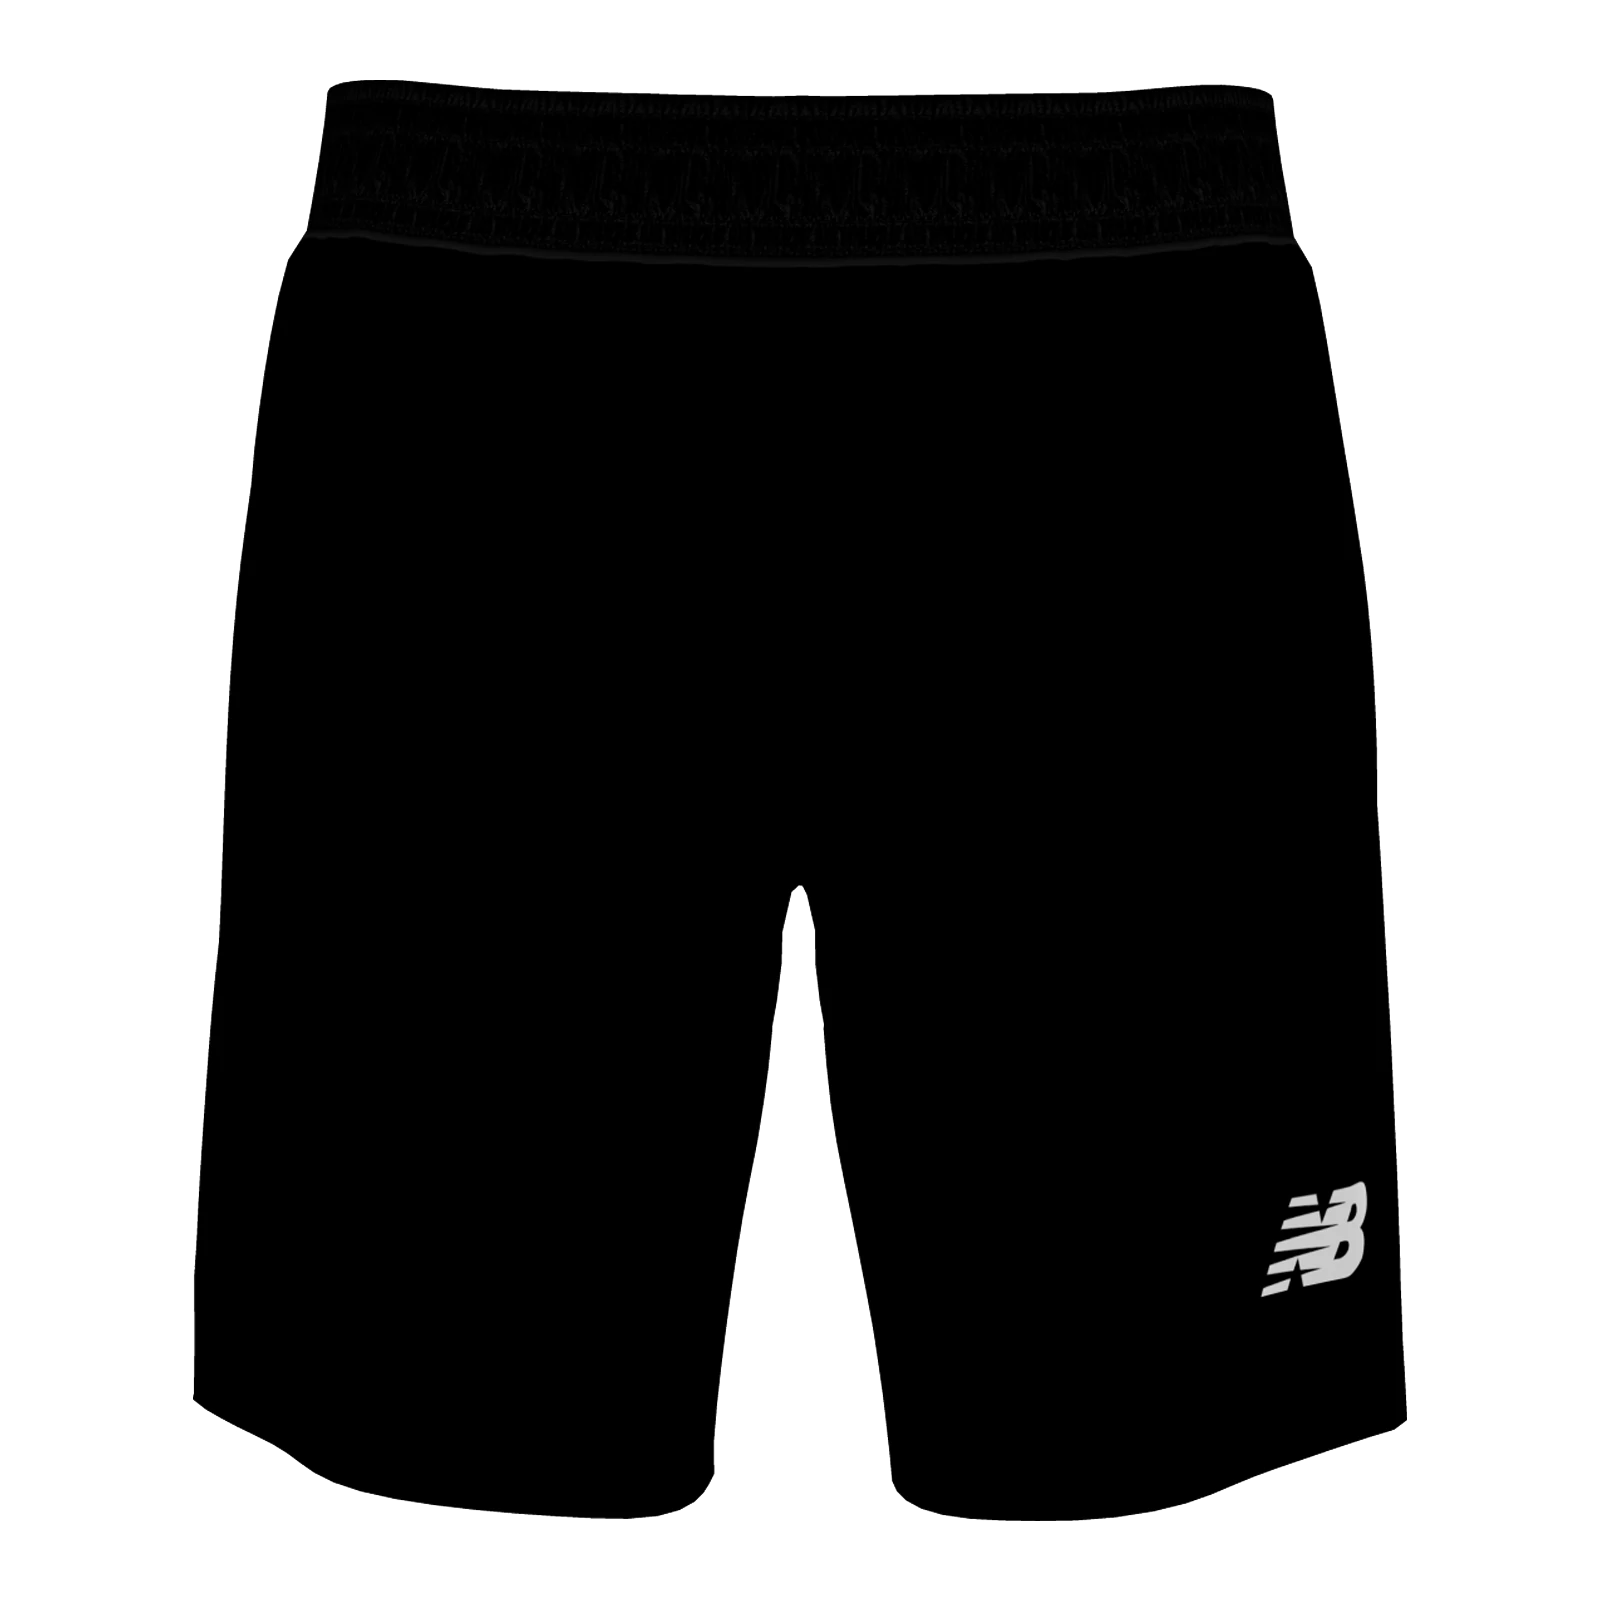 SD FORCE BRIGHTON PRACTICE SHORT - MENS/WOMENS/YOUTH